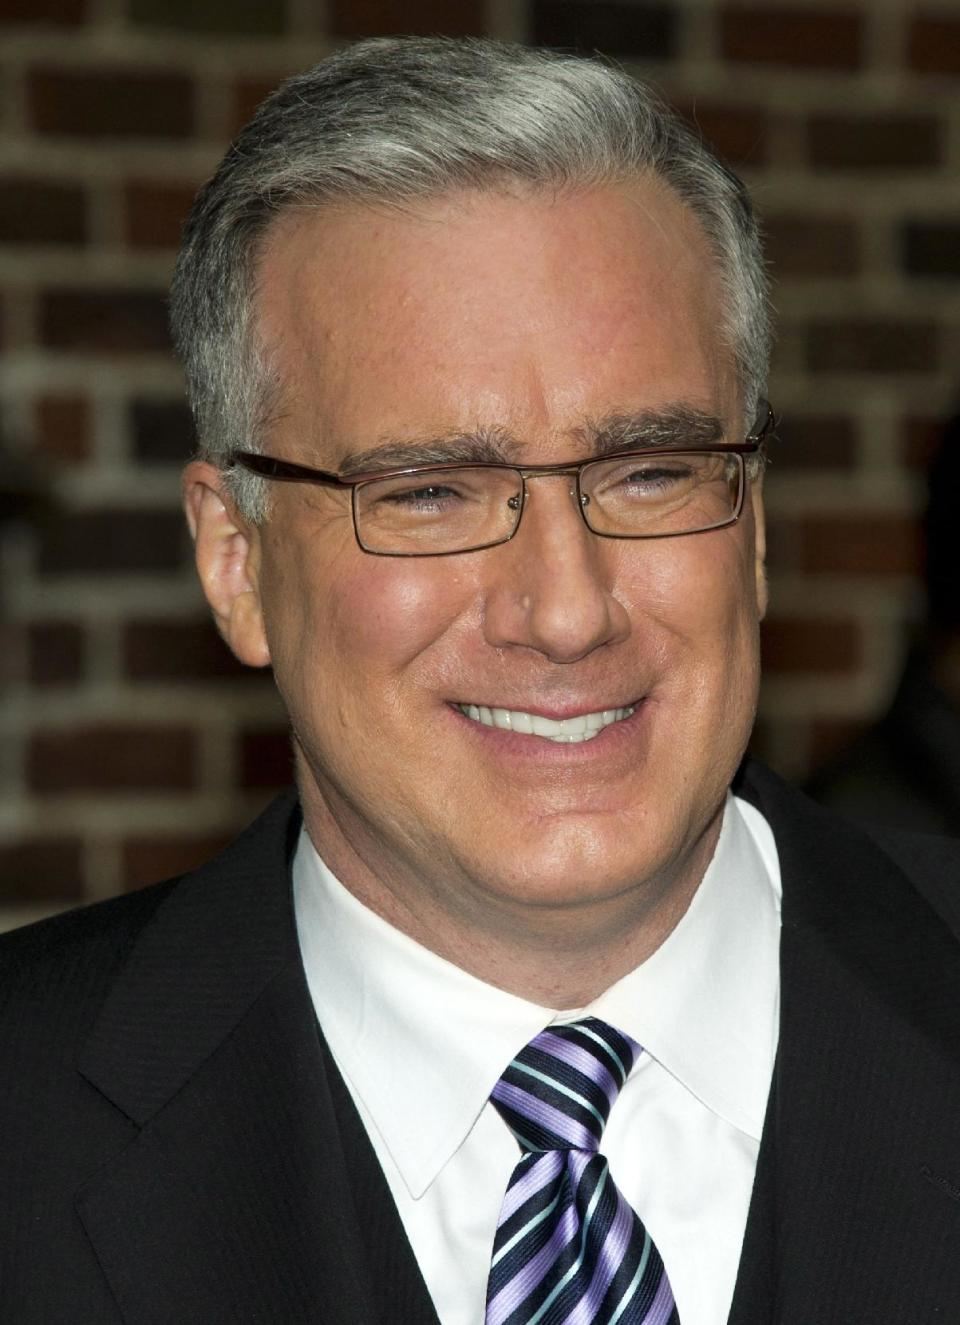 FILE - In this Oct. 24, 2011 file photo, political pundit Keith Olbermann leaves a taping of the "Late Show with David Letterman," in New York. Olbermann sued his former bosses at Current TV in Los Angeles on Thursday, seeking more than $50 million for breach of contract and other claims. His case claims his show for the network was fraught with technical problems and he was fired without cause. (AP Photo/Charles Sykes, file)